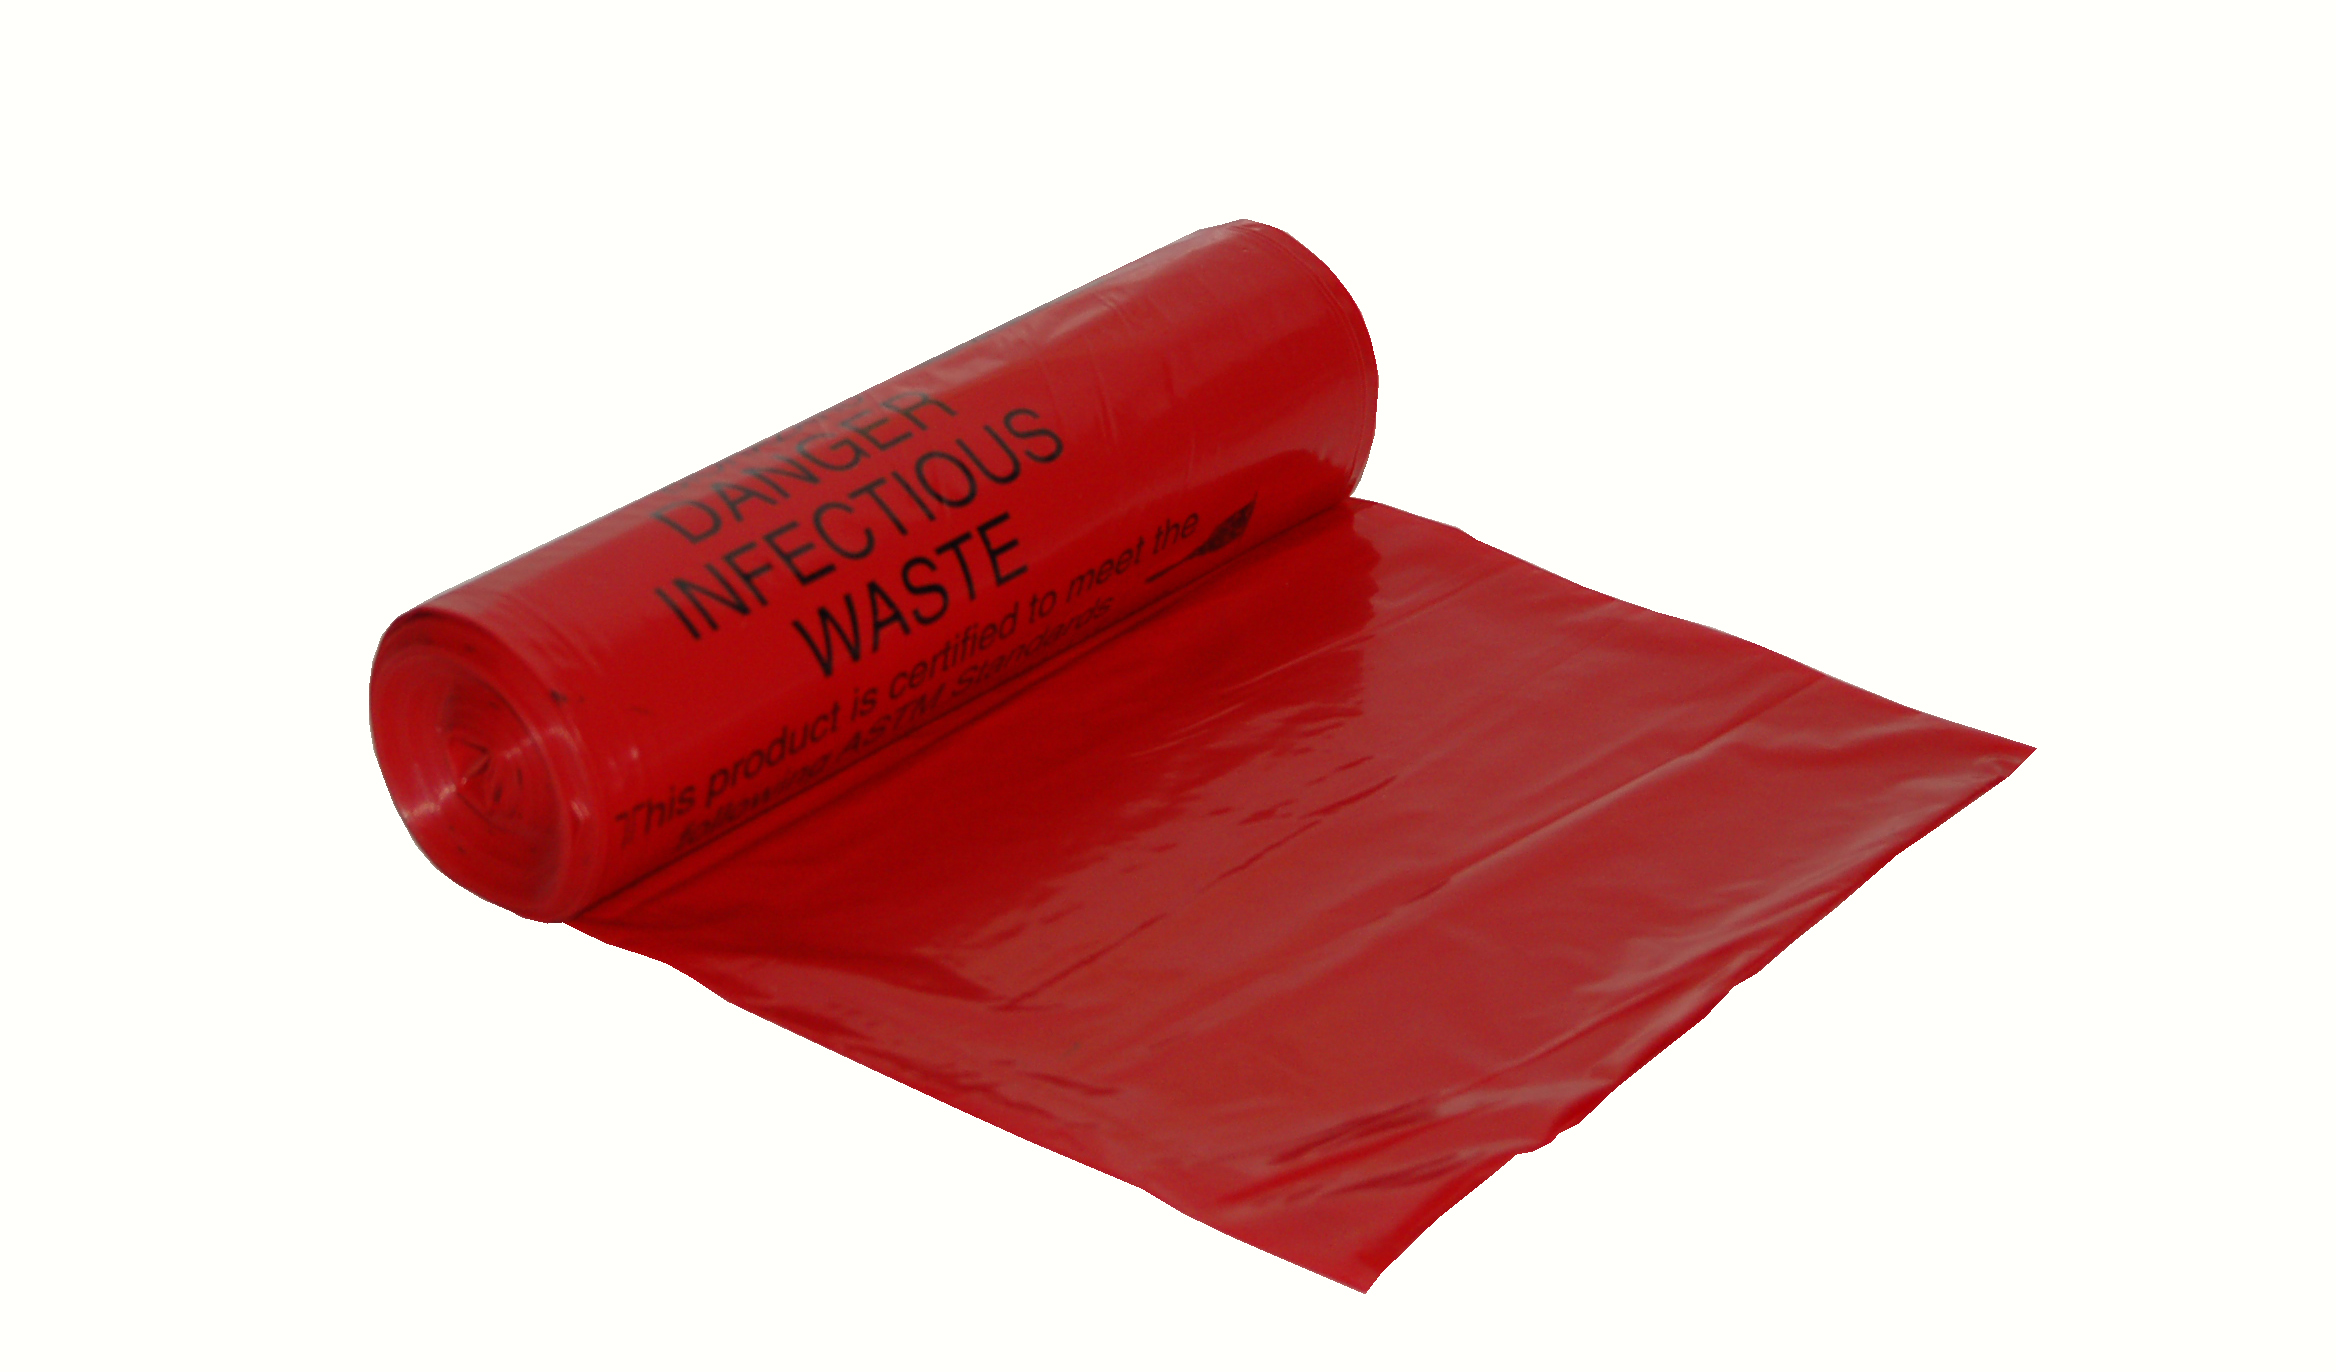 INFECTIOUS WASTE 40X48 1.3 MIL LD POLYLINER- RED (100/CS)